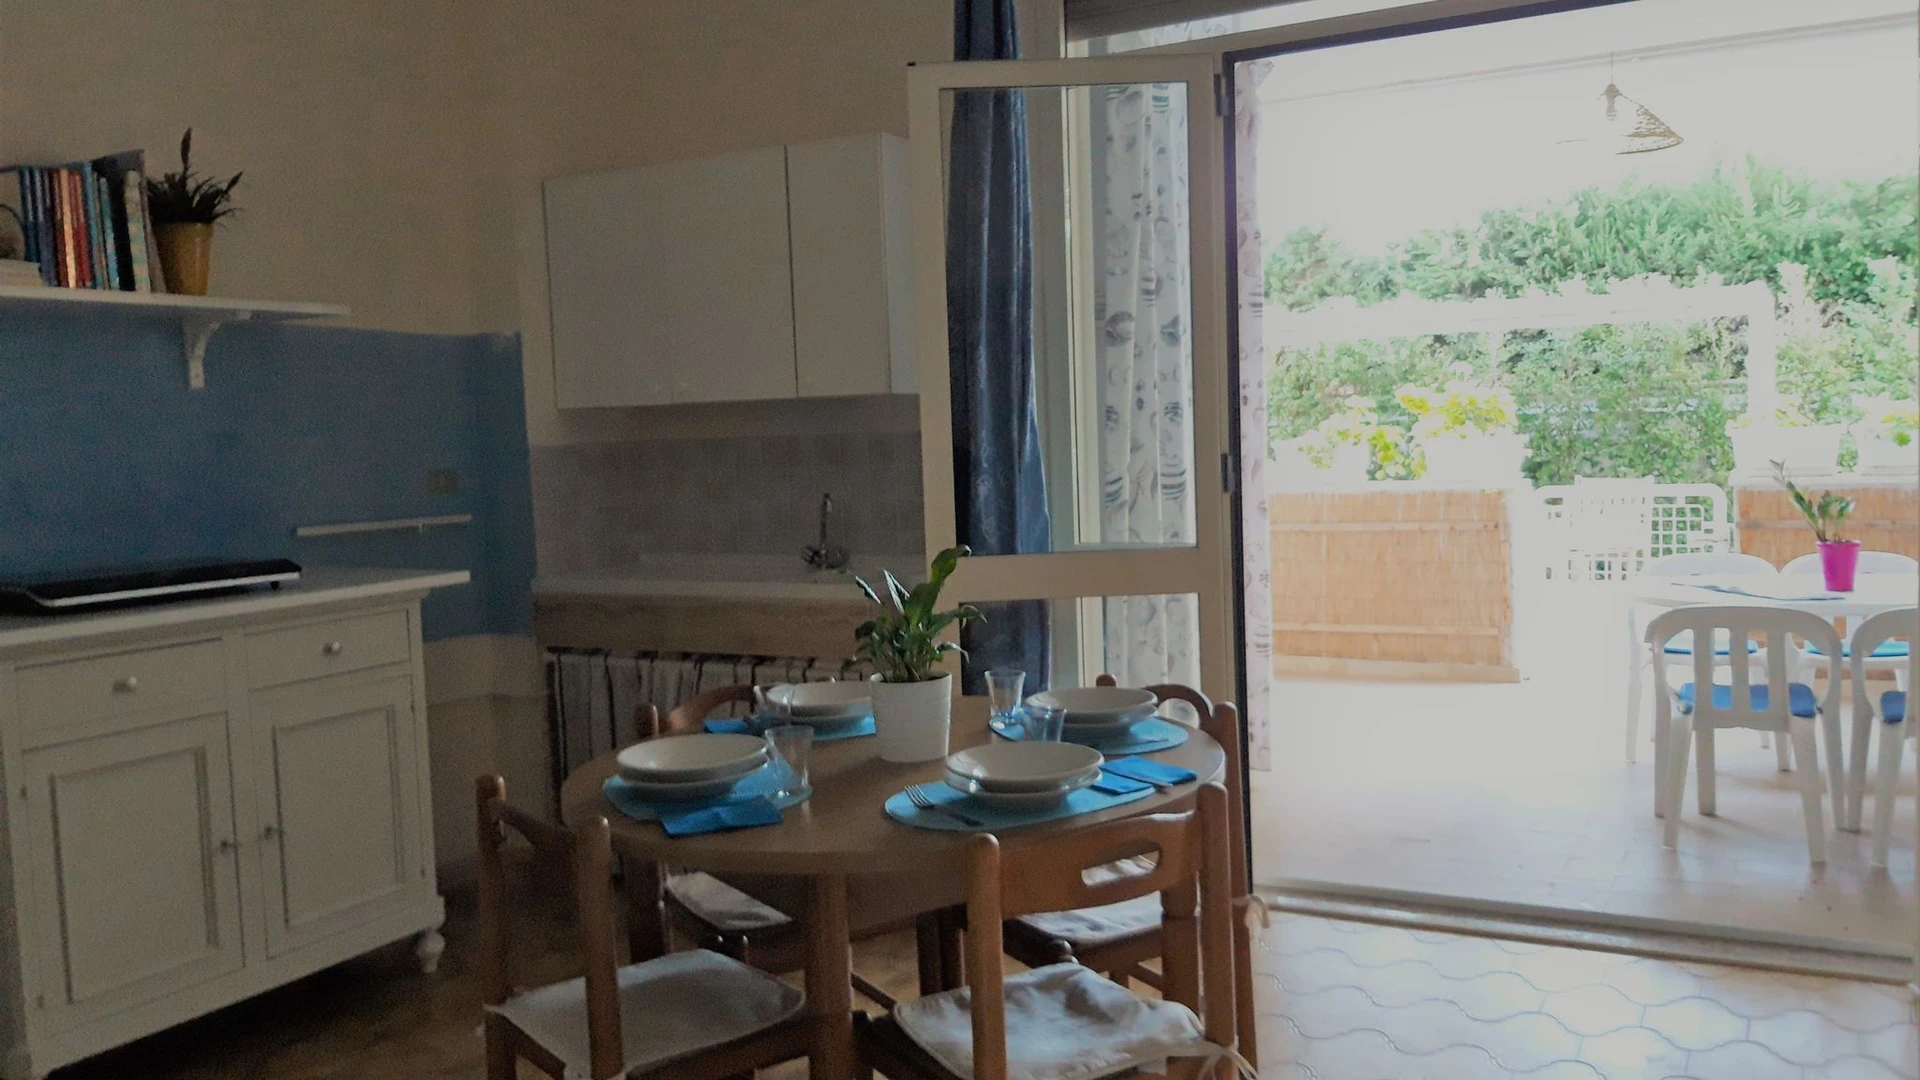 Accommodation with 3 bedrooms in Lecce